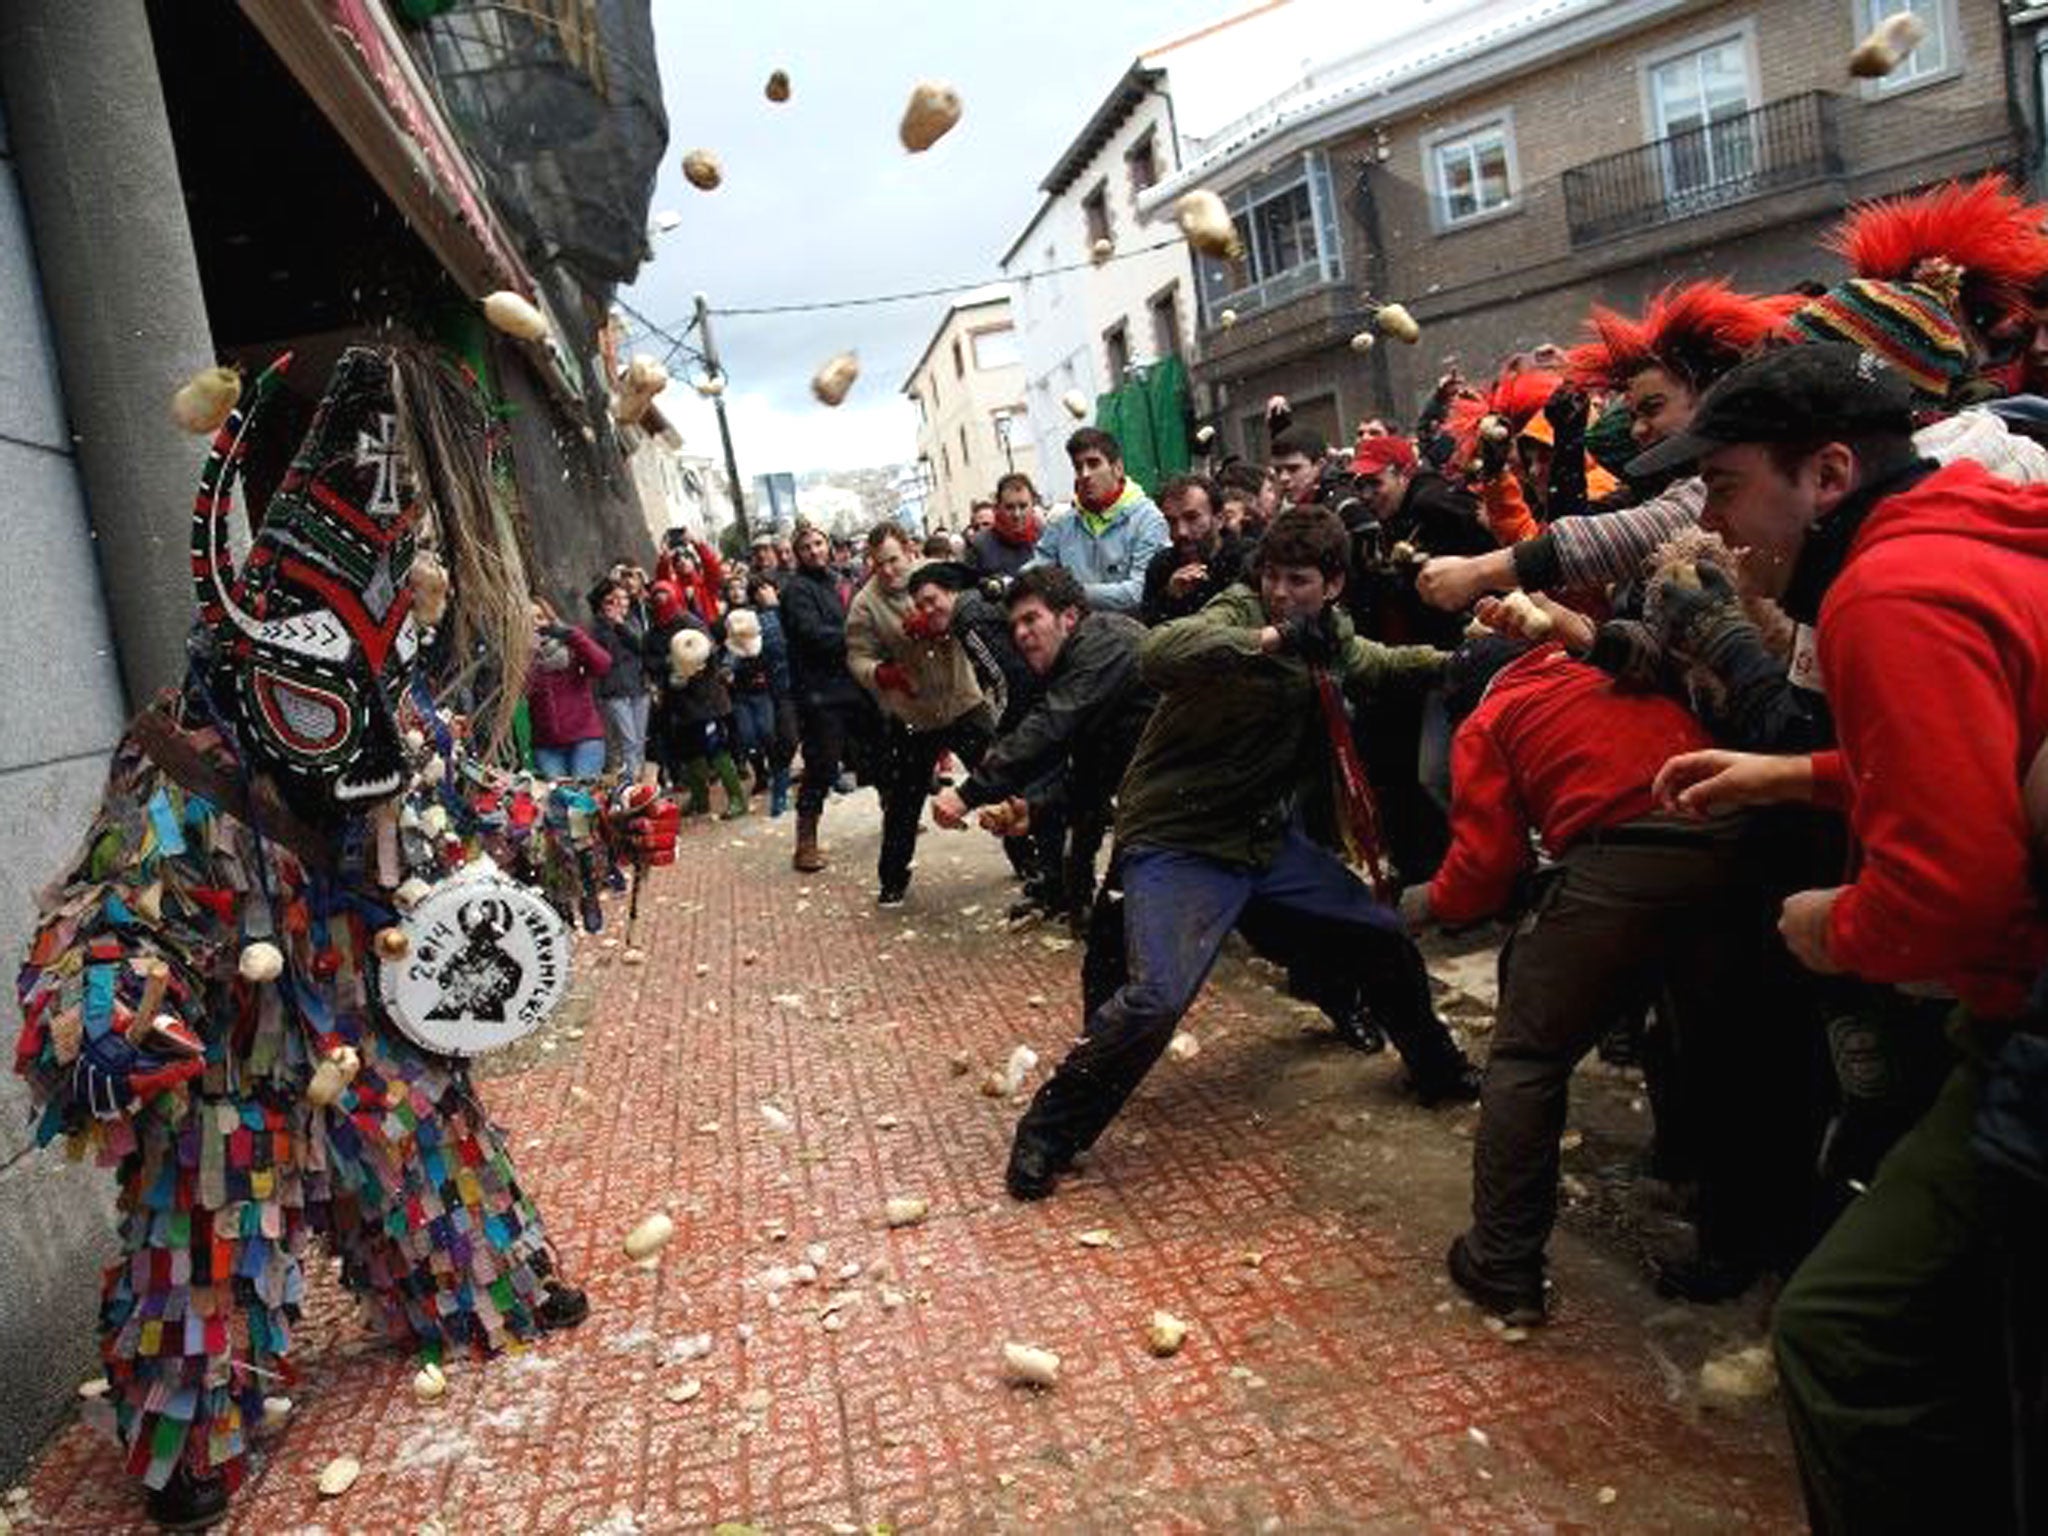 People throw turnips at the Jarramplas as he makes his way through the streets beating his drum during the Jarramplas Festival in Piornal